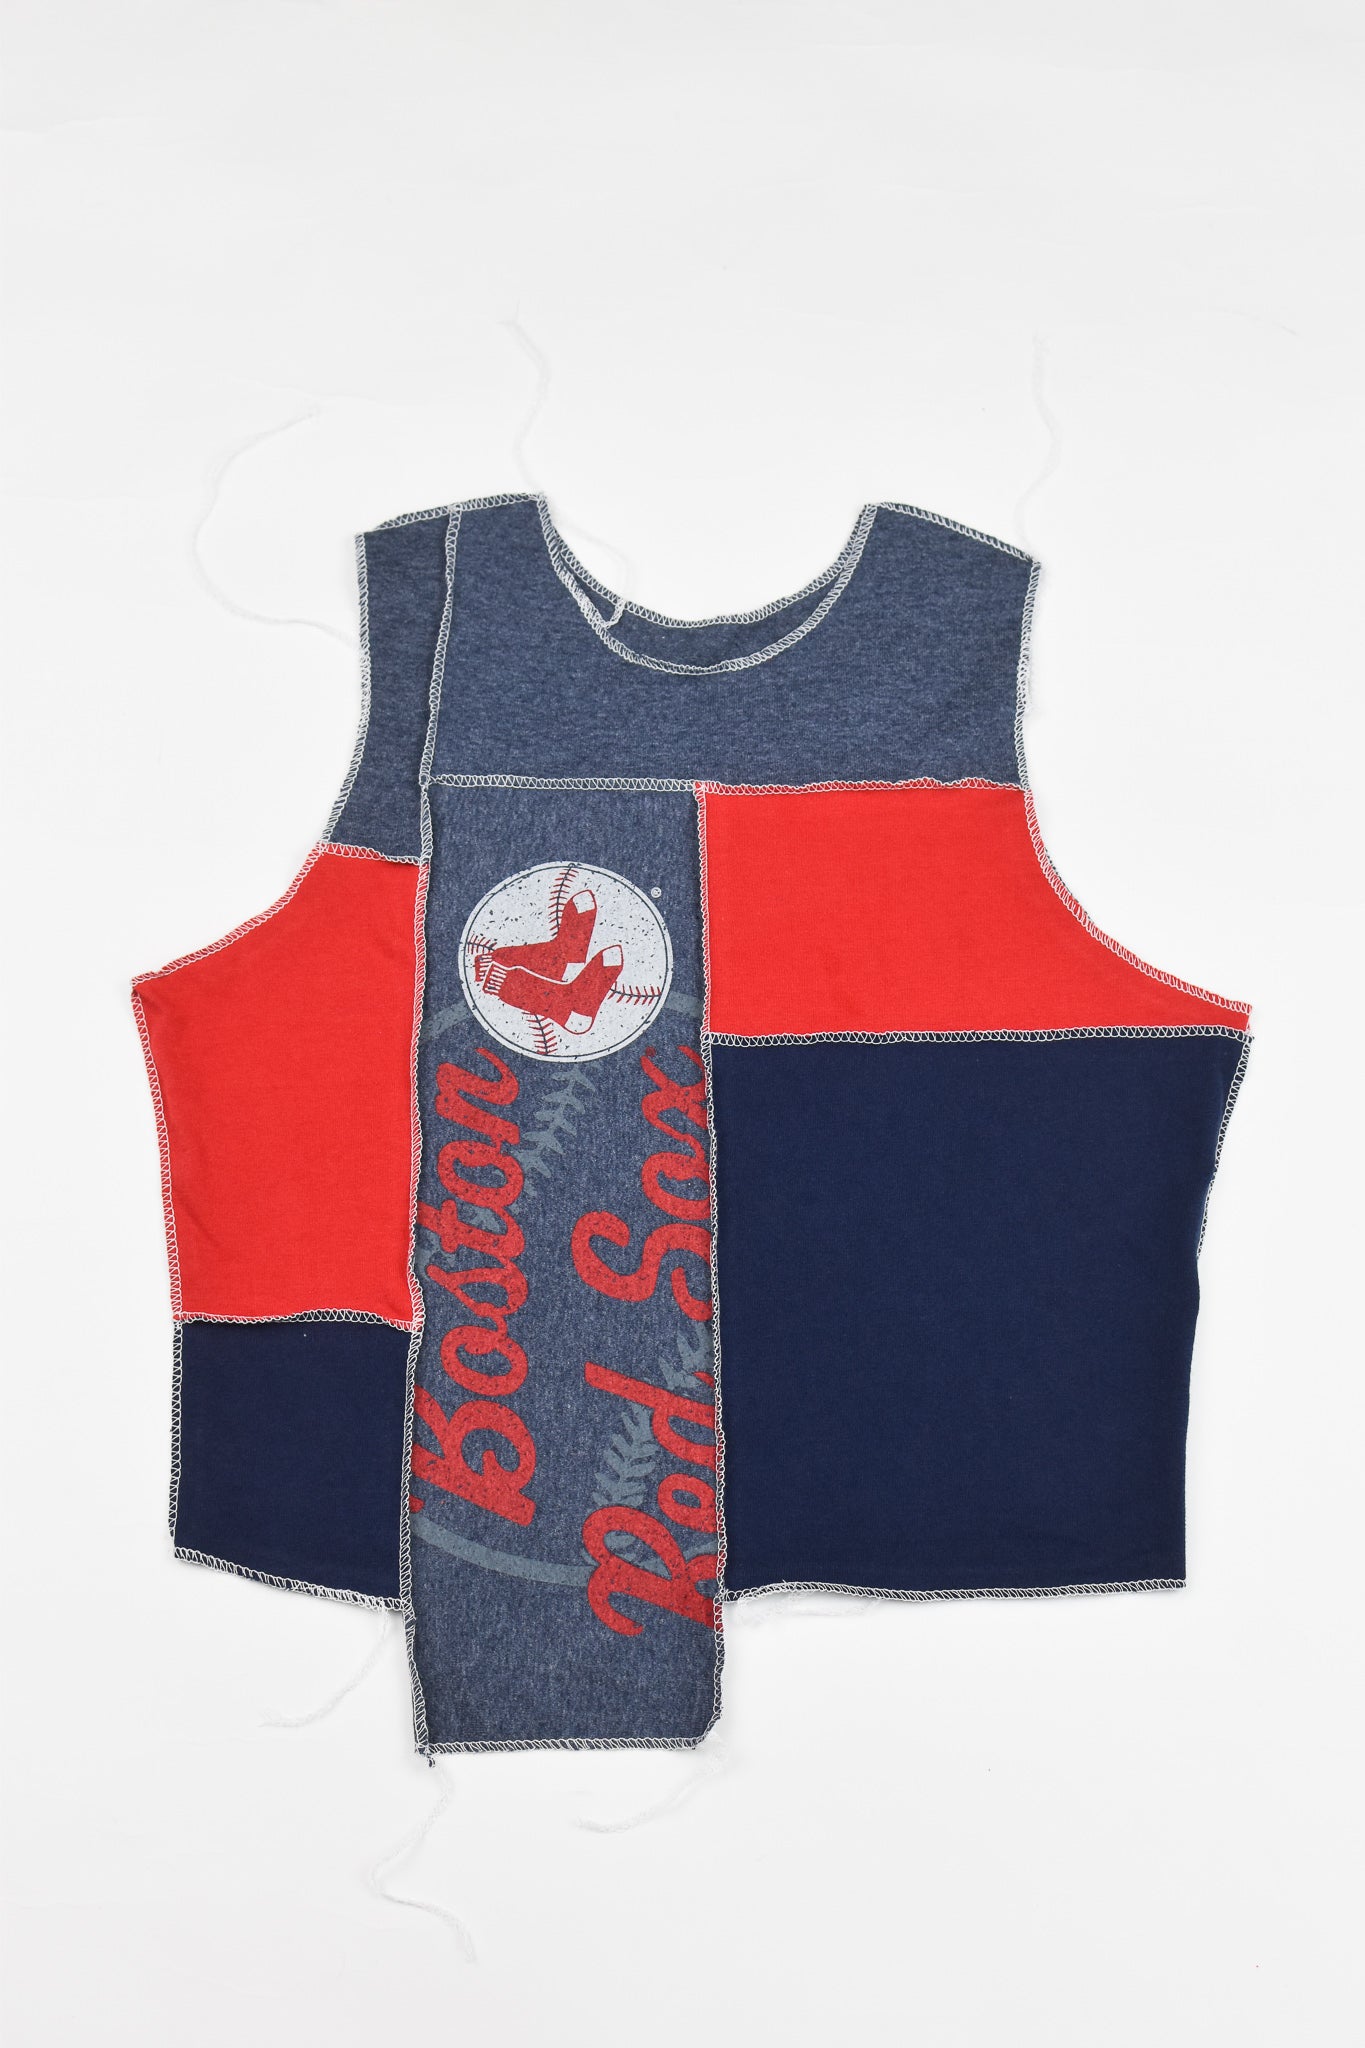 Upcycled Red Sox Scrappy Tank Top - Tonguetied Apparel